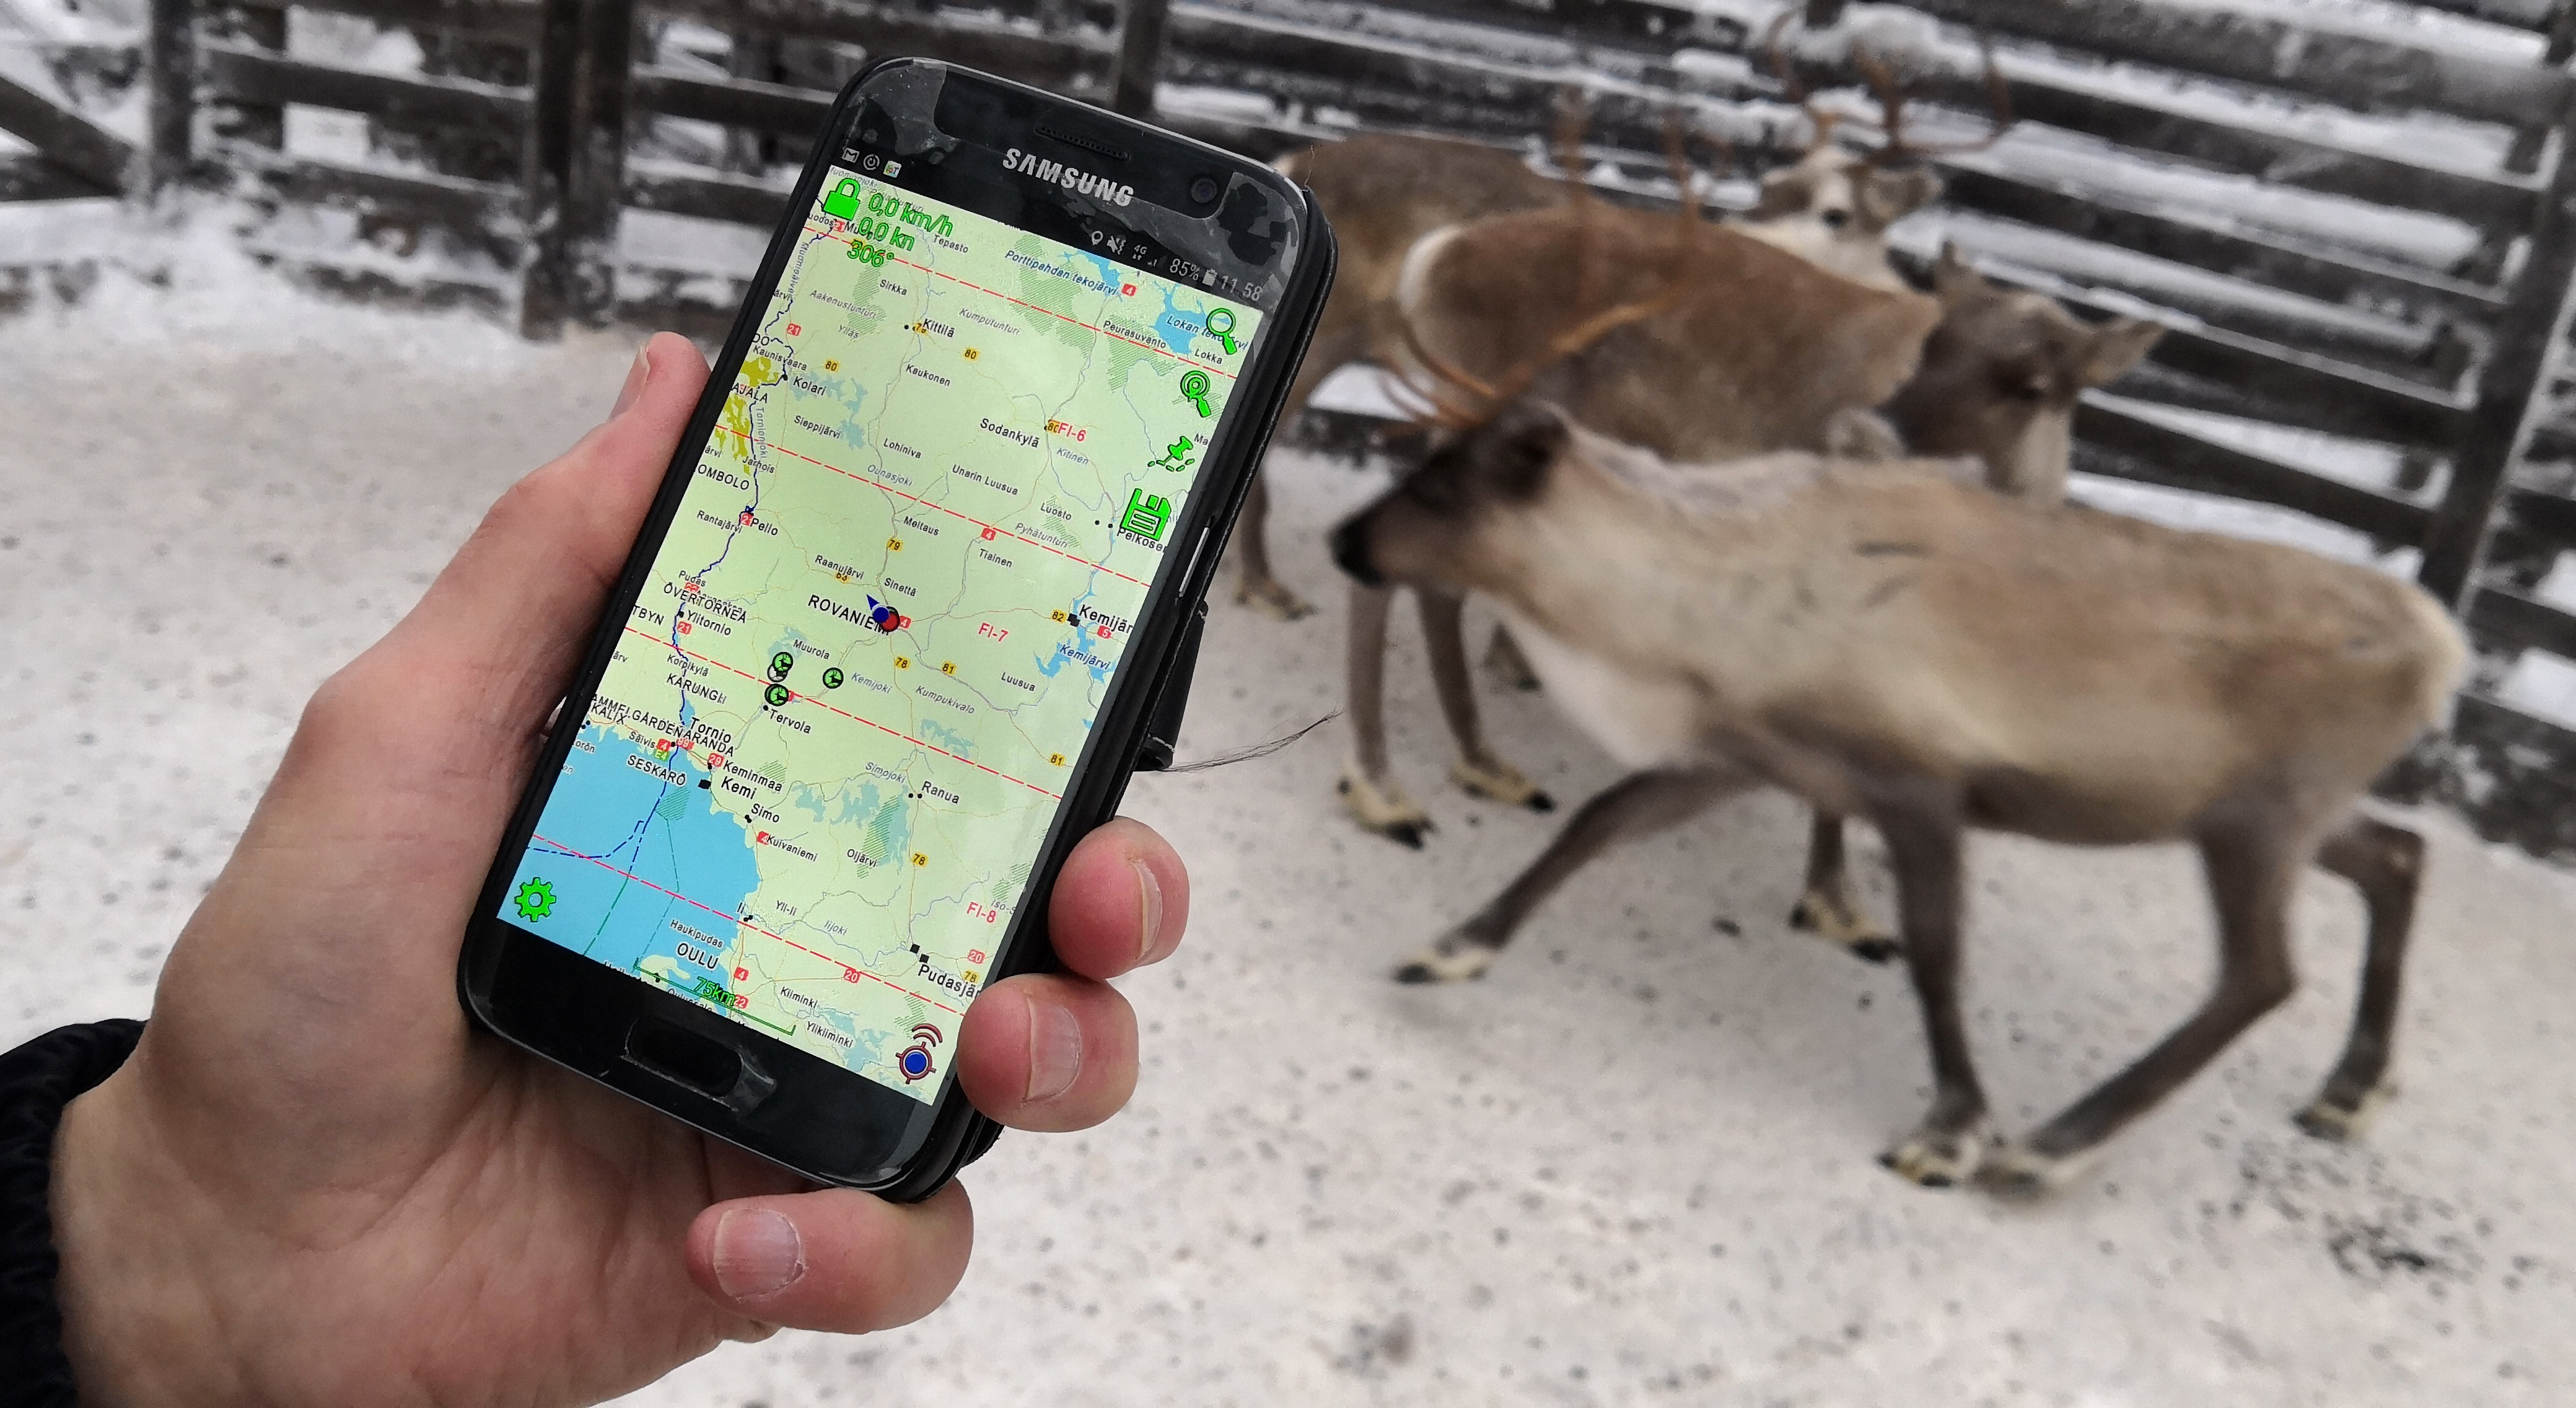 jammer legal forms arizona | Then One Foggy Christmas Eve, Reindeers Got Connected